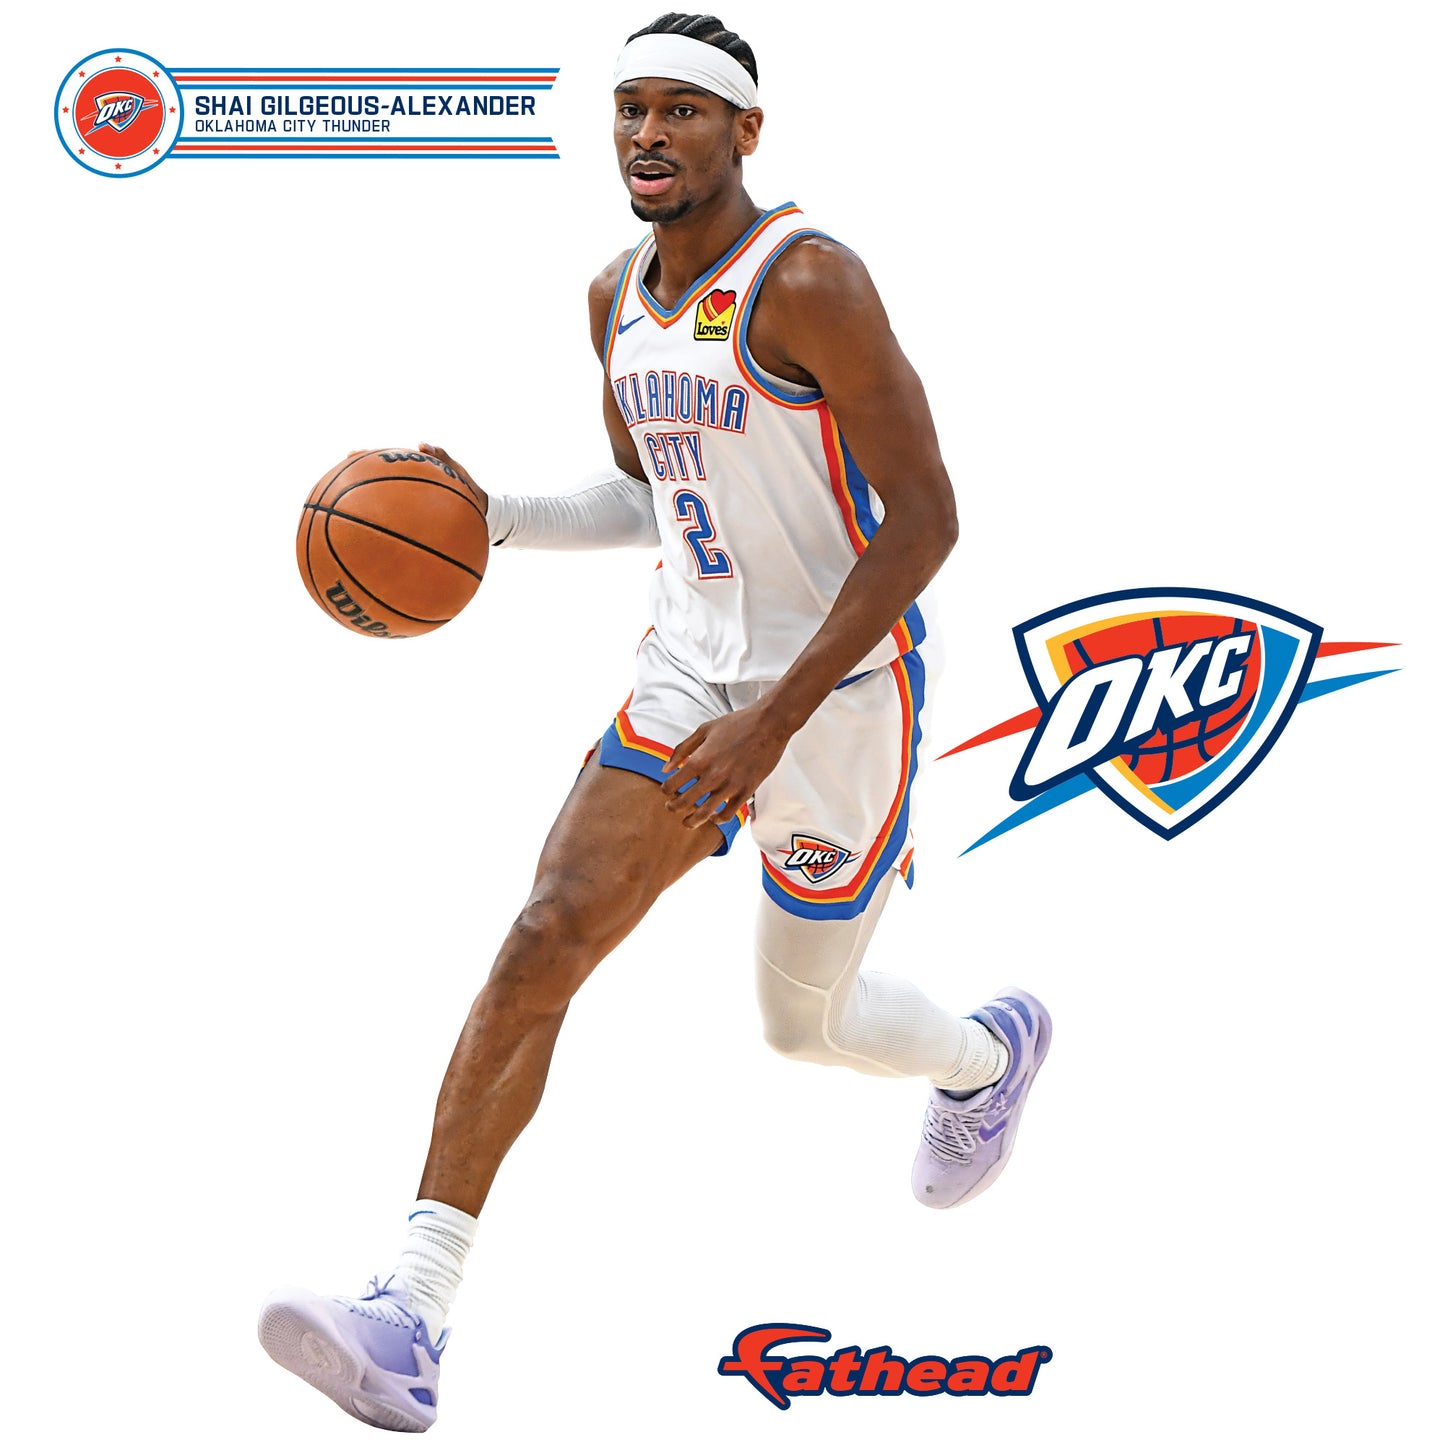 Oklahoma City Thunder: Shai Gilgeous-Alexander Association Jersey        - Officially Licensed NBA Removable     Adhesive Decal